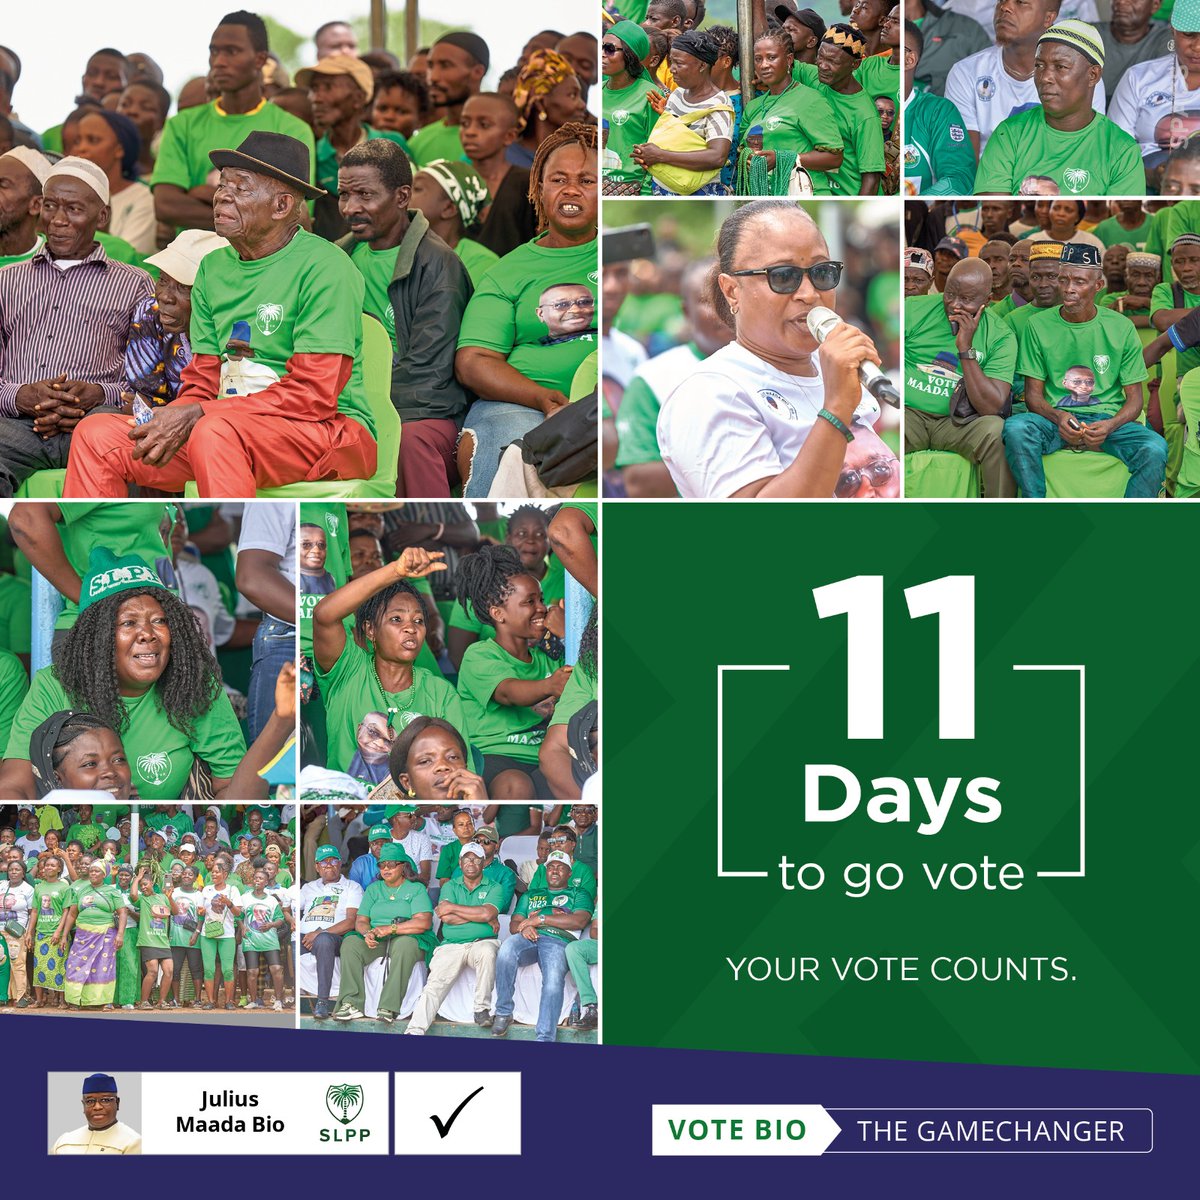 11 Days to go... VOTE Julius Maada Bio - the game-changer. The man that always puts Salone first. Vote the right way; vote Maada Bio! 

#GameChanger
#SierraLeone #SLPPDelivers #SierraLeoneDecides2023 #5MoreYears #OneCountryOnePeople